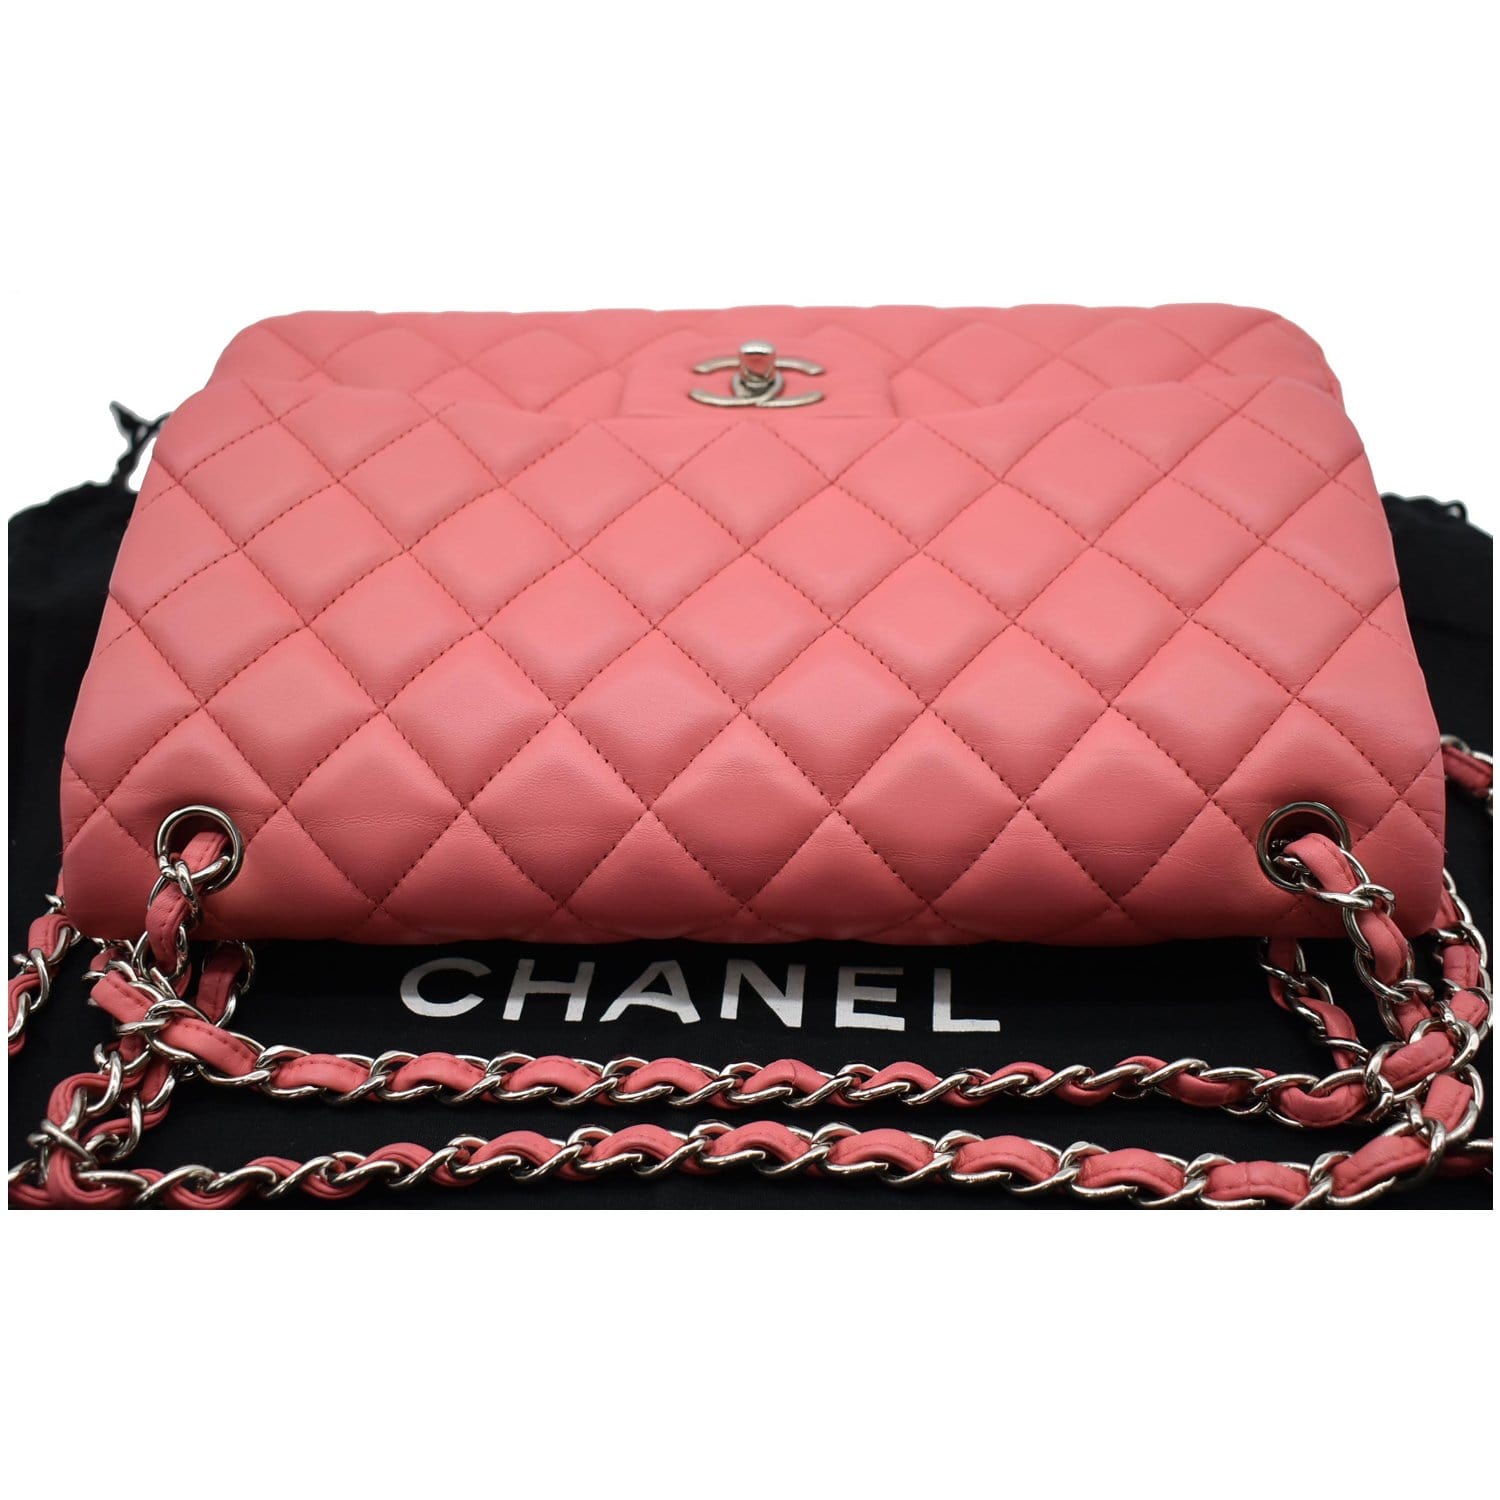 CHANEL Pink Cotton Exterior Bags & Handbags for Women